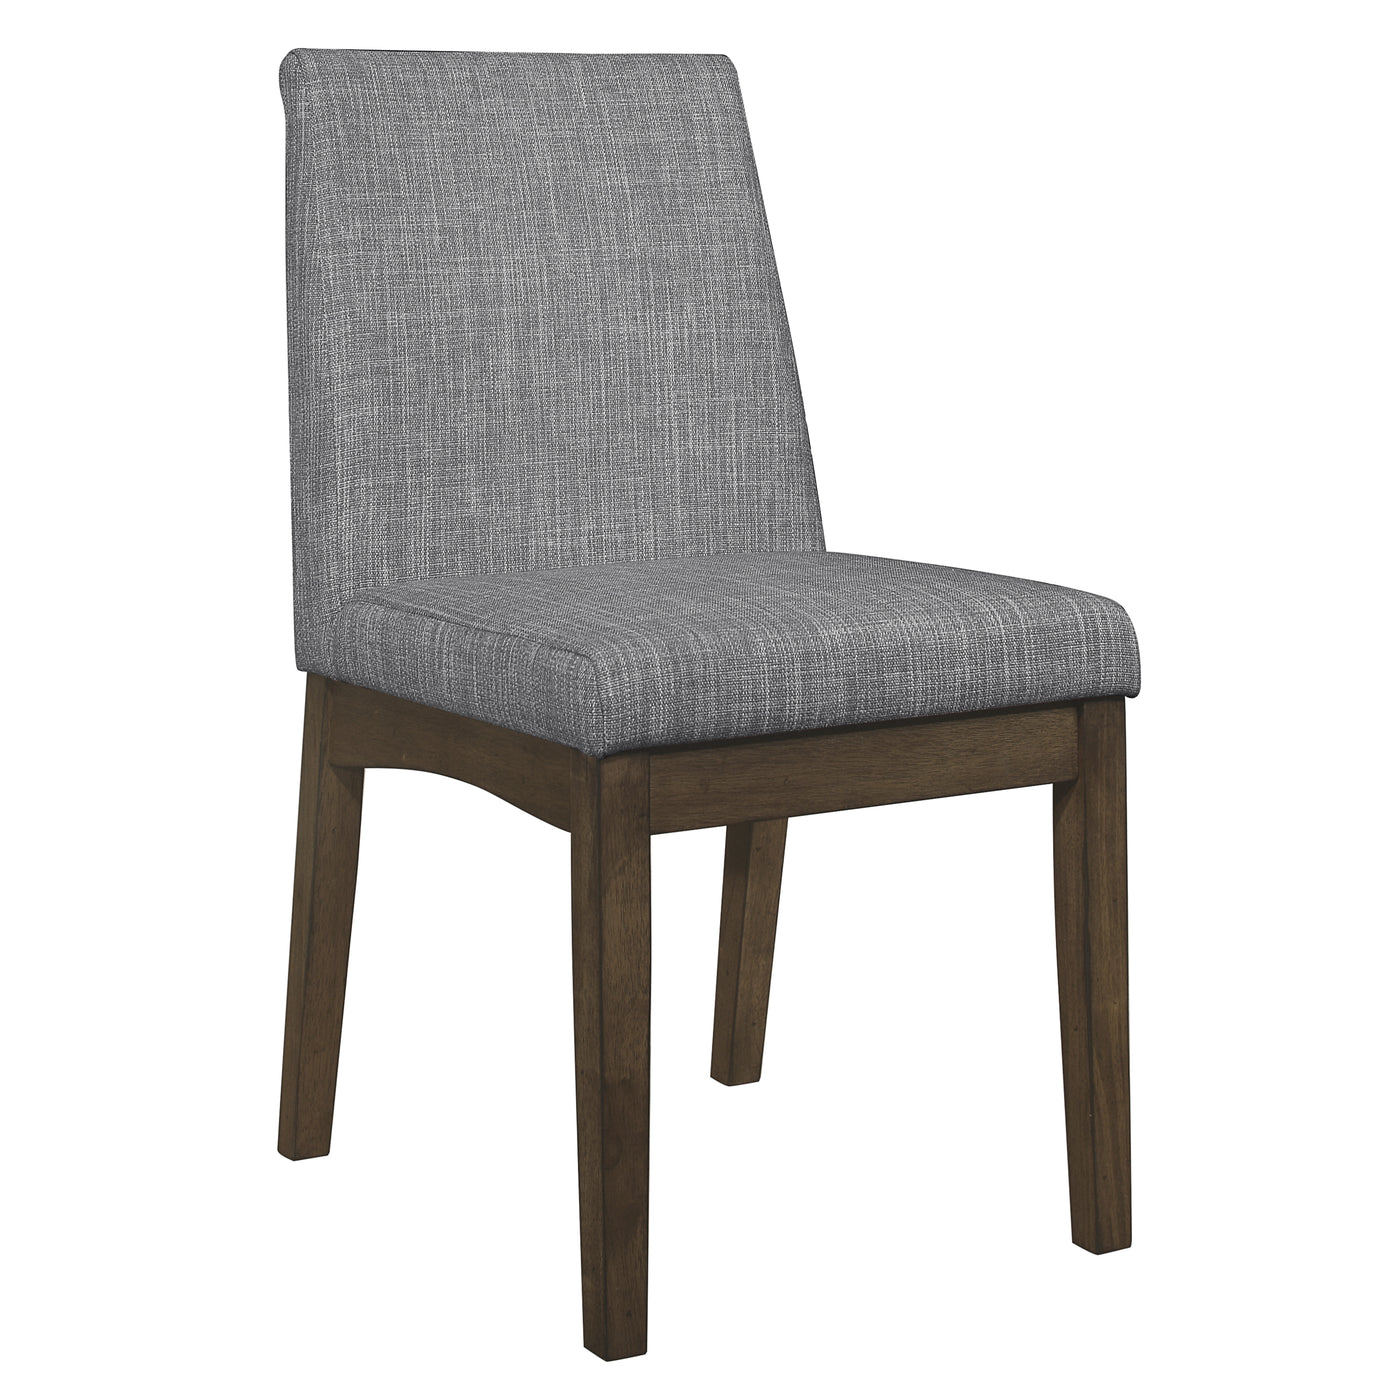 Whittaker Dining Chair - Brown